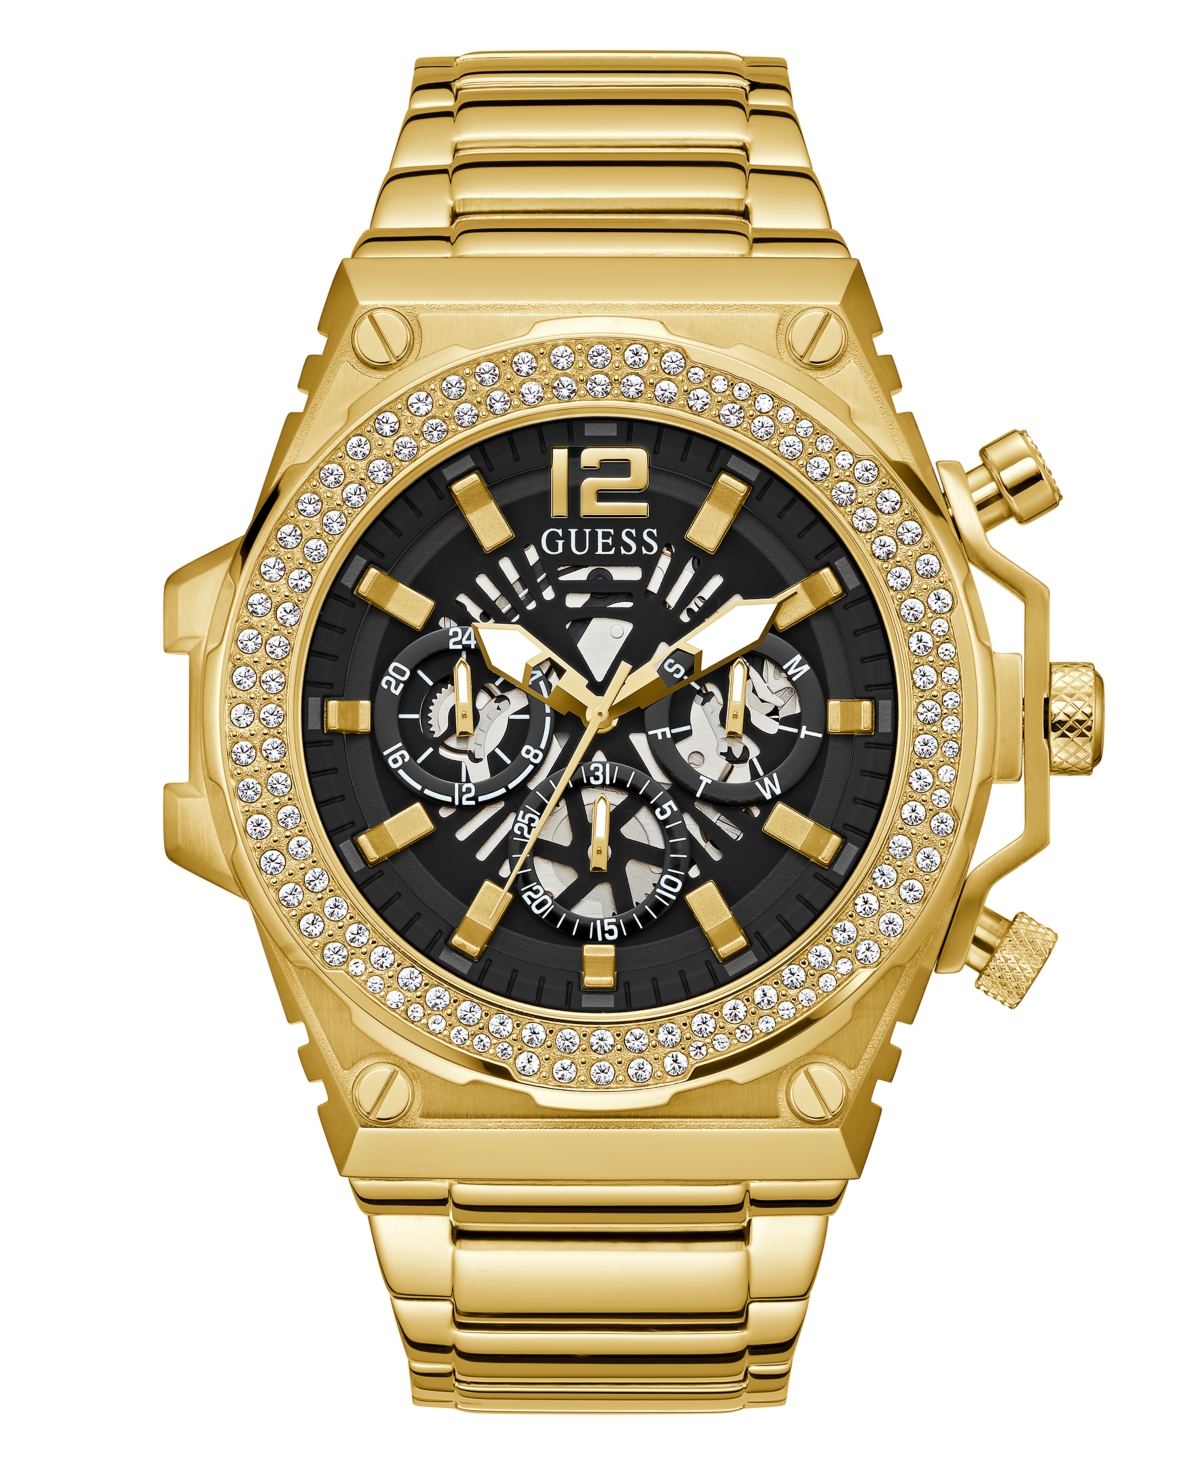 Guess Men's Multi-function Gold-tone Stainless Steel Watch 48mm In Gold Tone